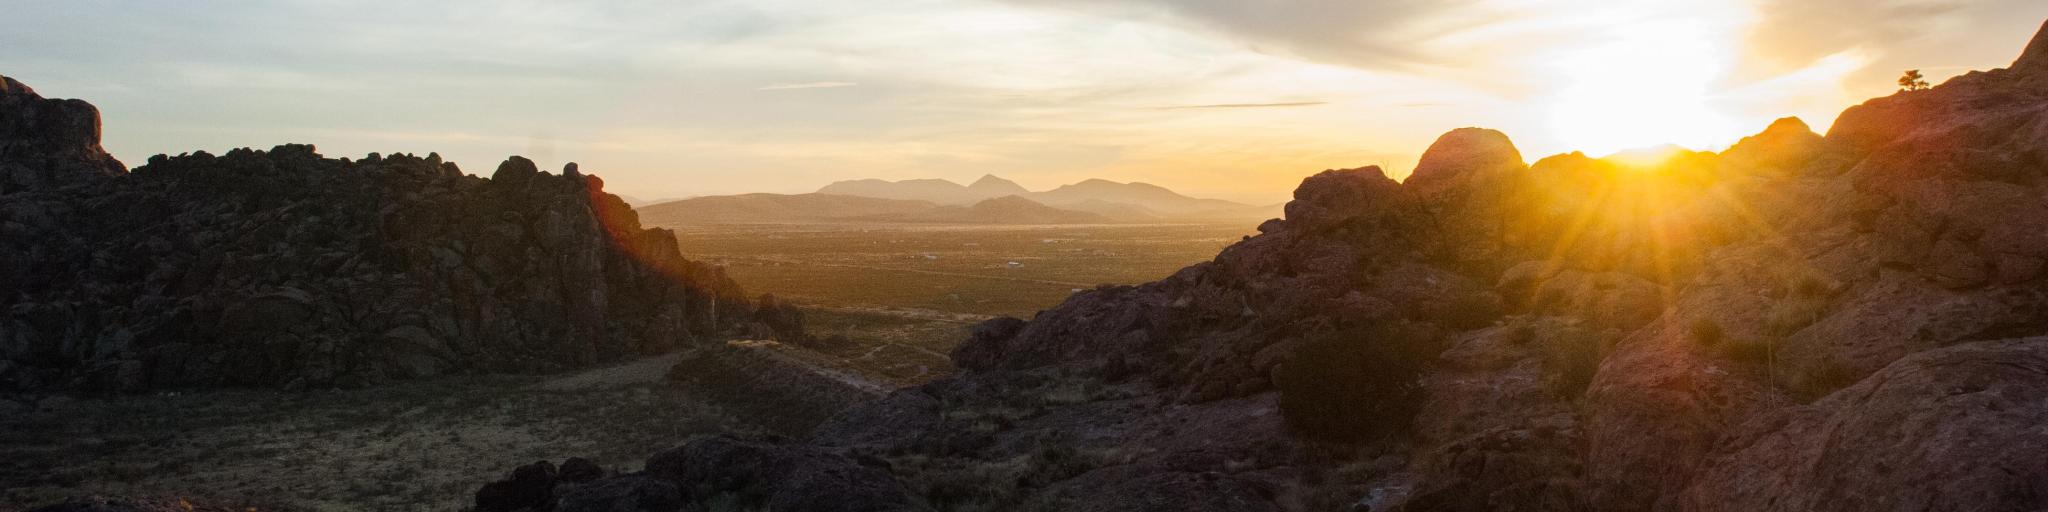 Scenic landscape view of Hueco Tanks State Park in El Paso, Texas, USA during sunset.